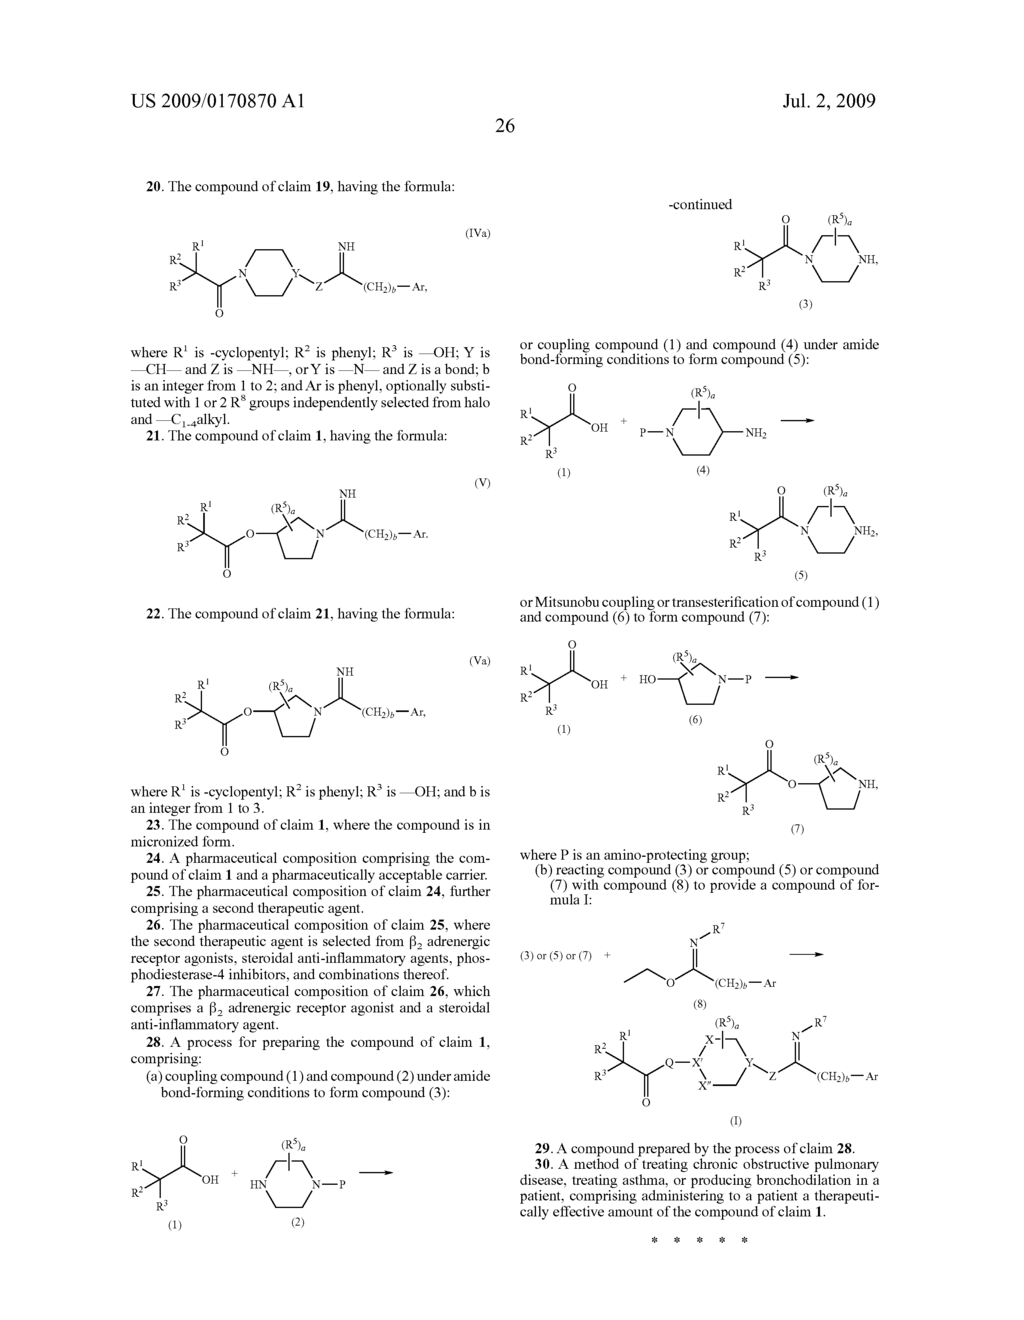 AMIDINE-CONTAINING COMPOUNDS USEFUL AS MUSCARINIC RECEPTOR ANTAGONISTS - diagram, schematic, and image 27